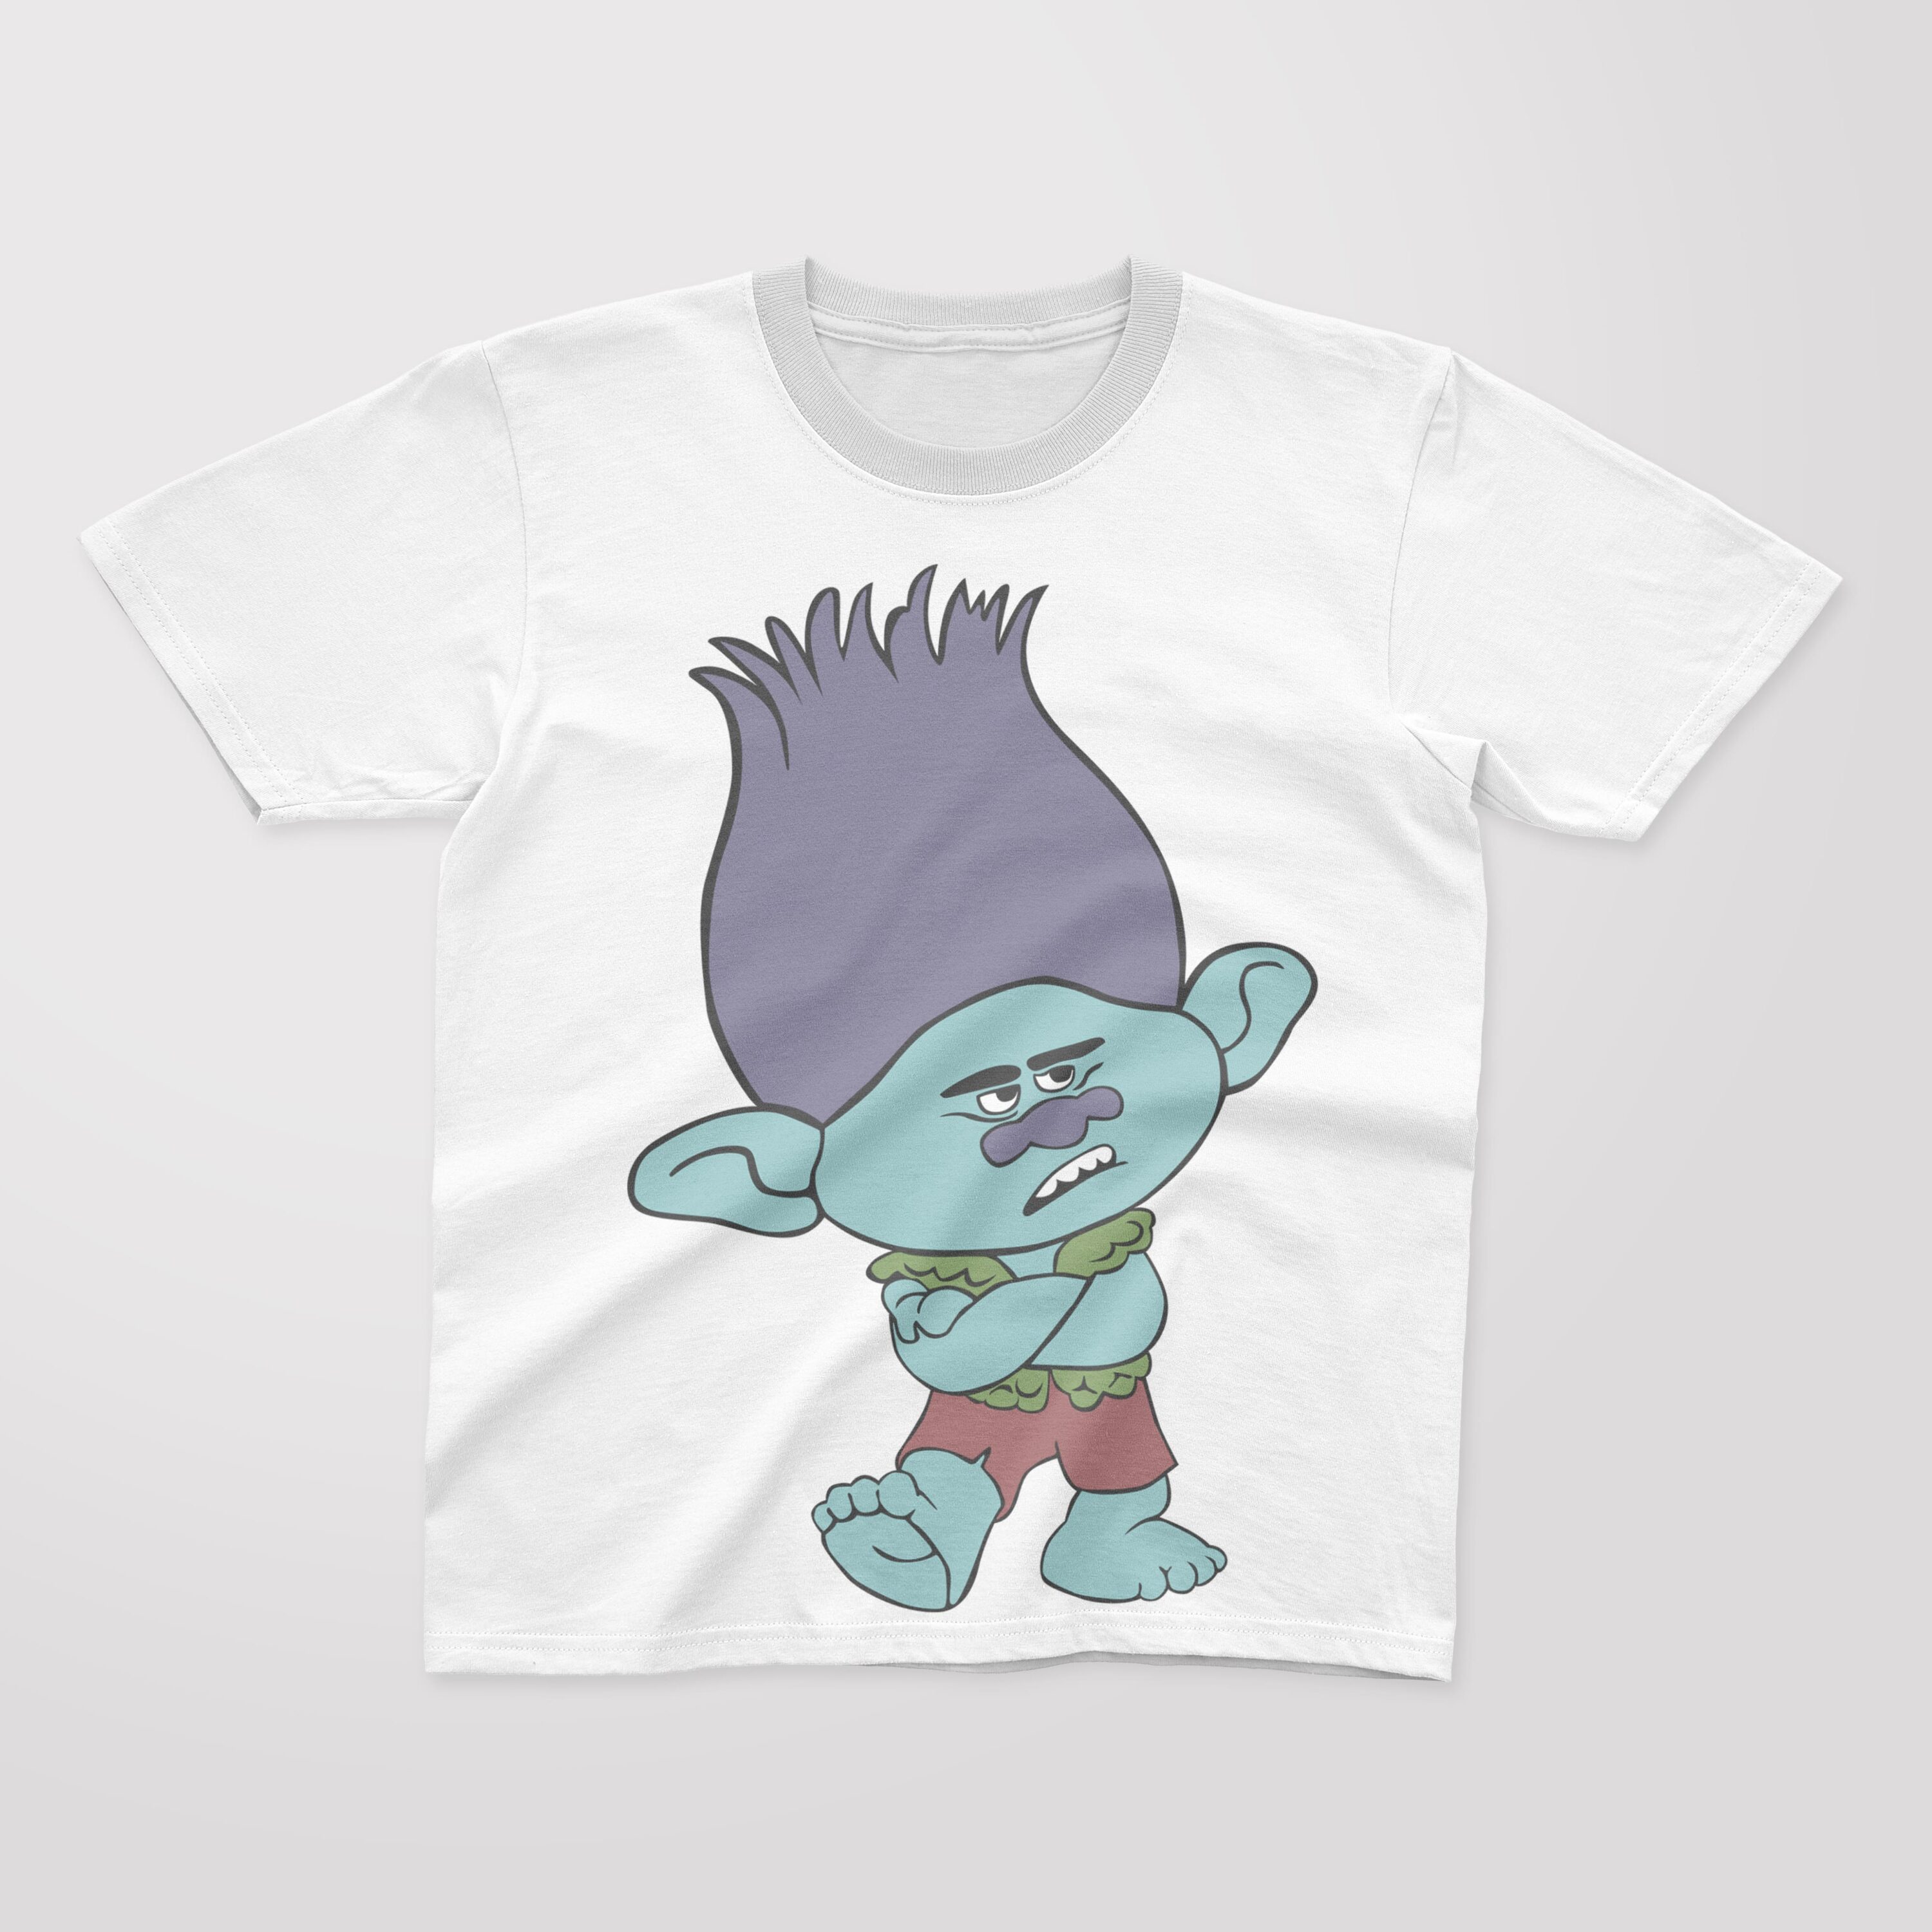 White T-shirt with image of cartoon character - Branch.